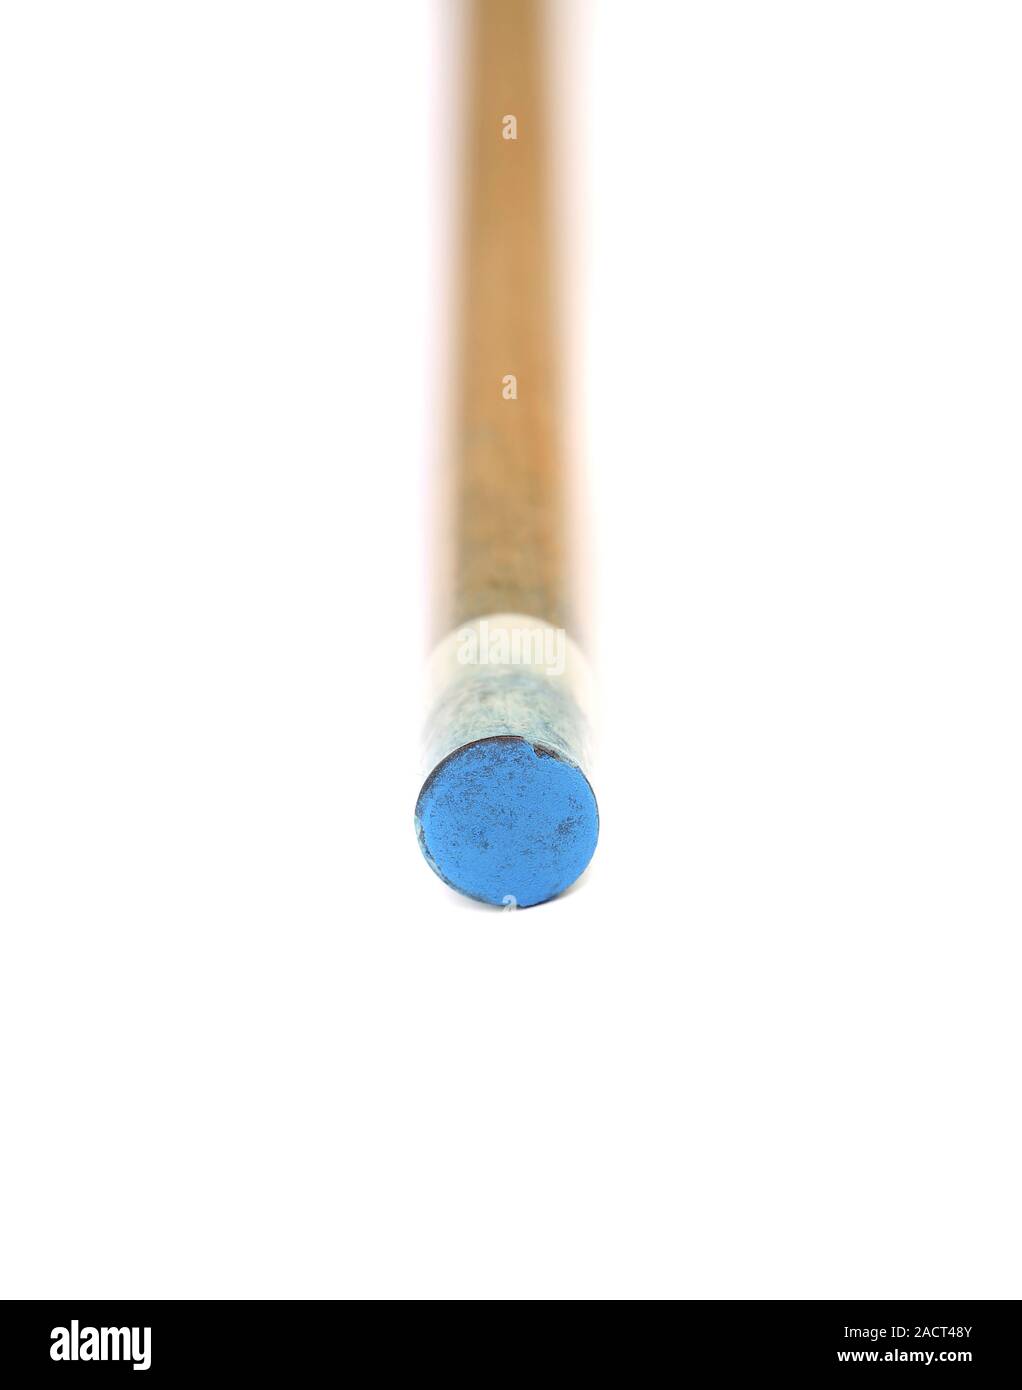 Pool cues. Blue end. Stock Photo